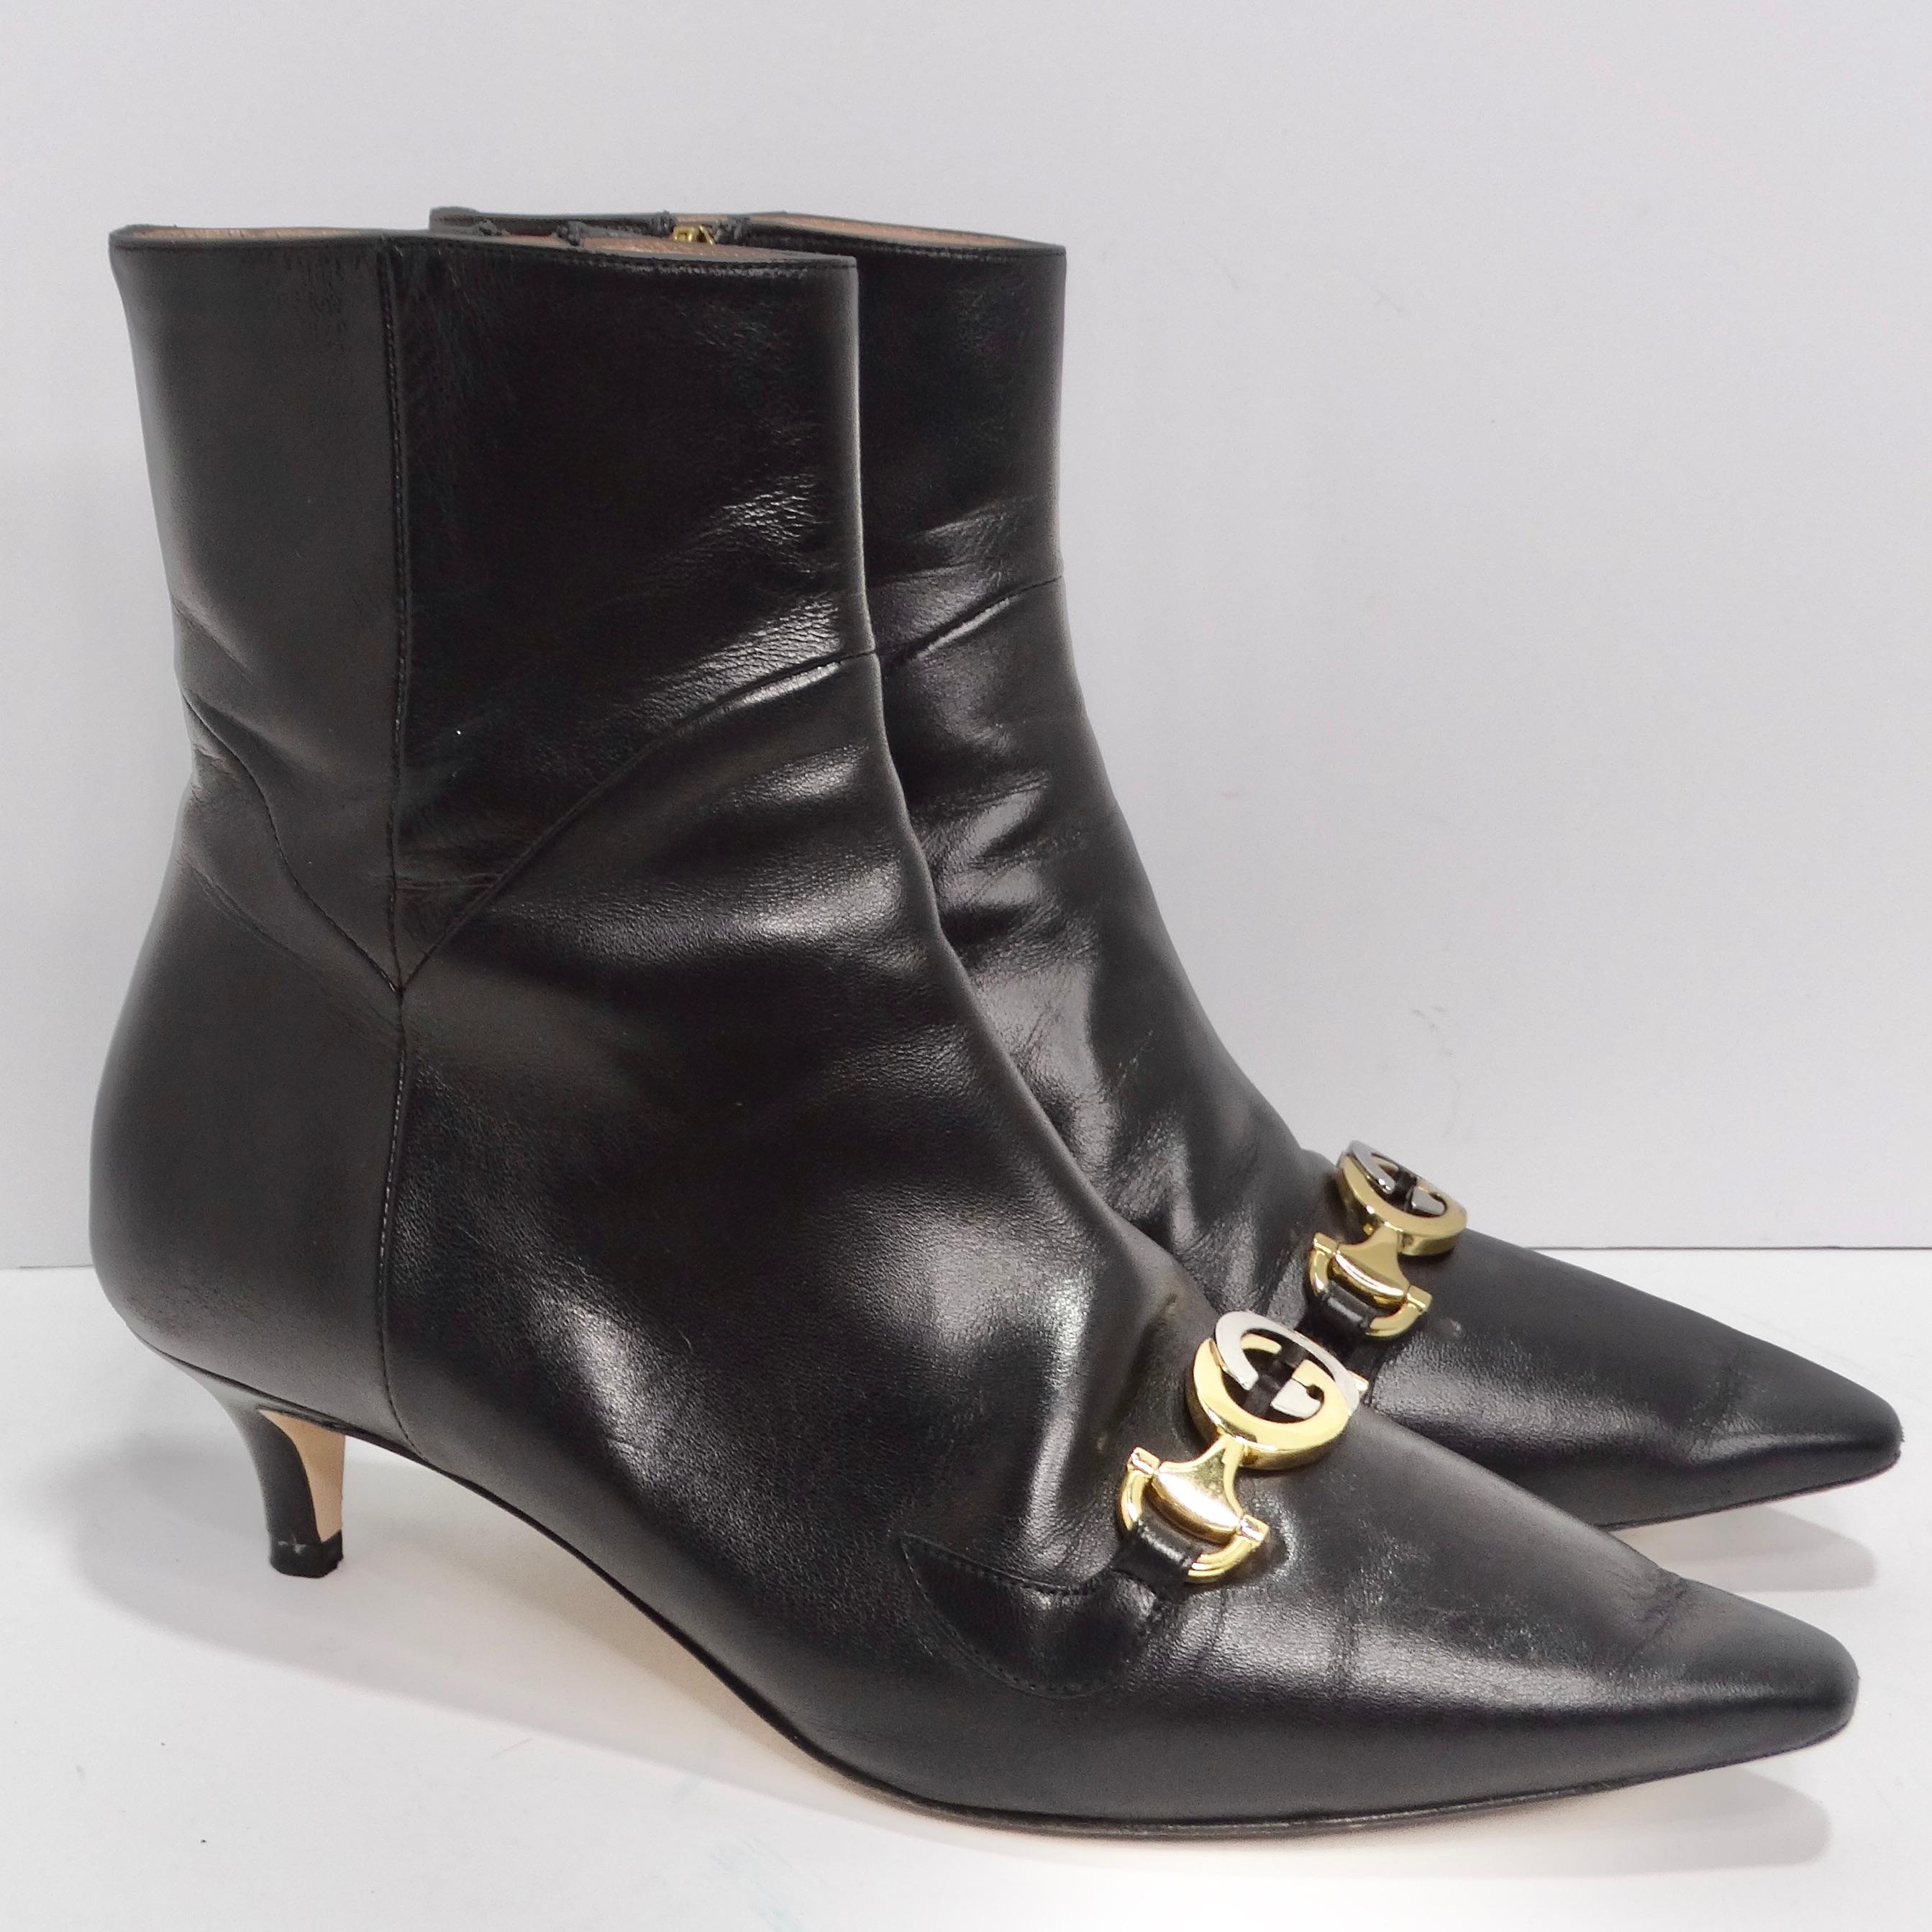 Gucci Leather Zumi Kitten Heel Ankle Boots 1